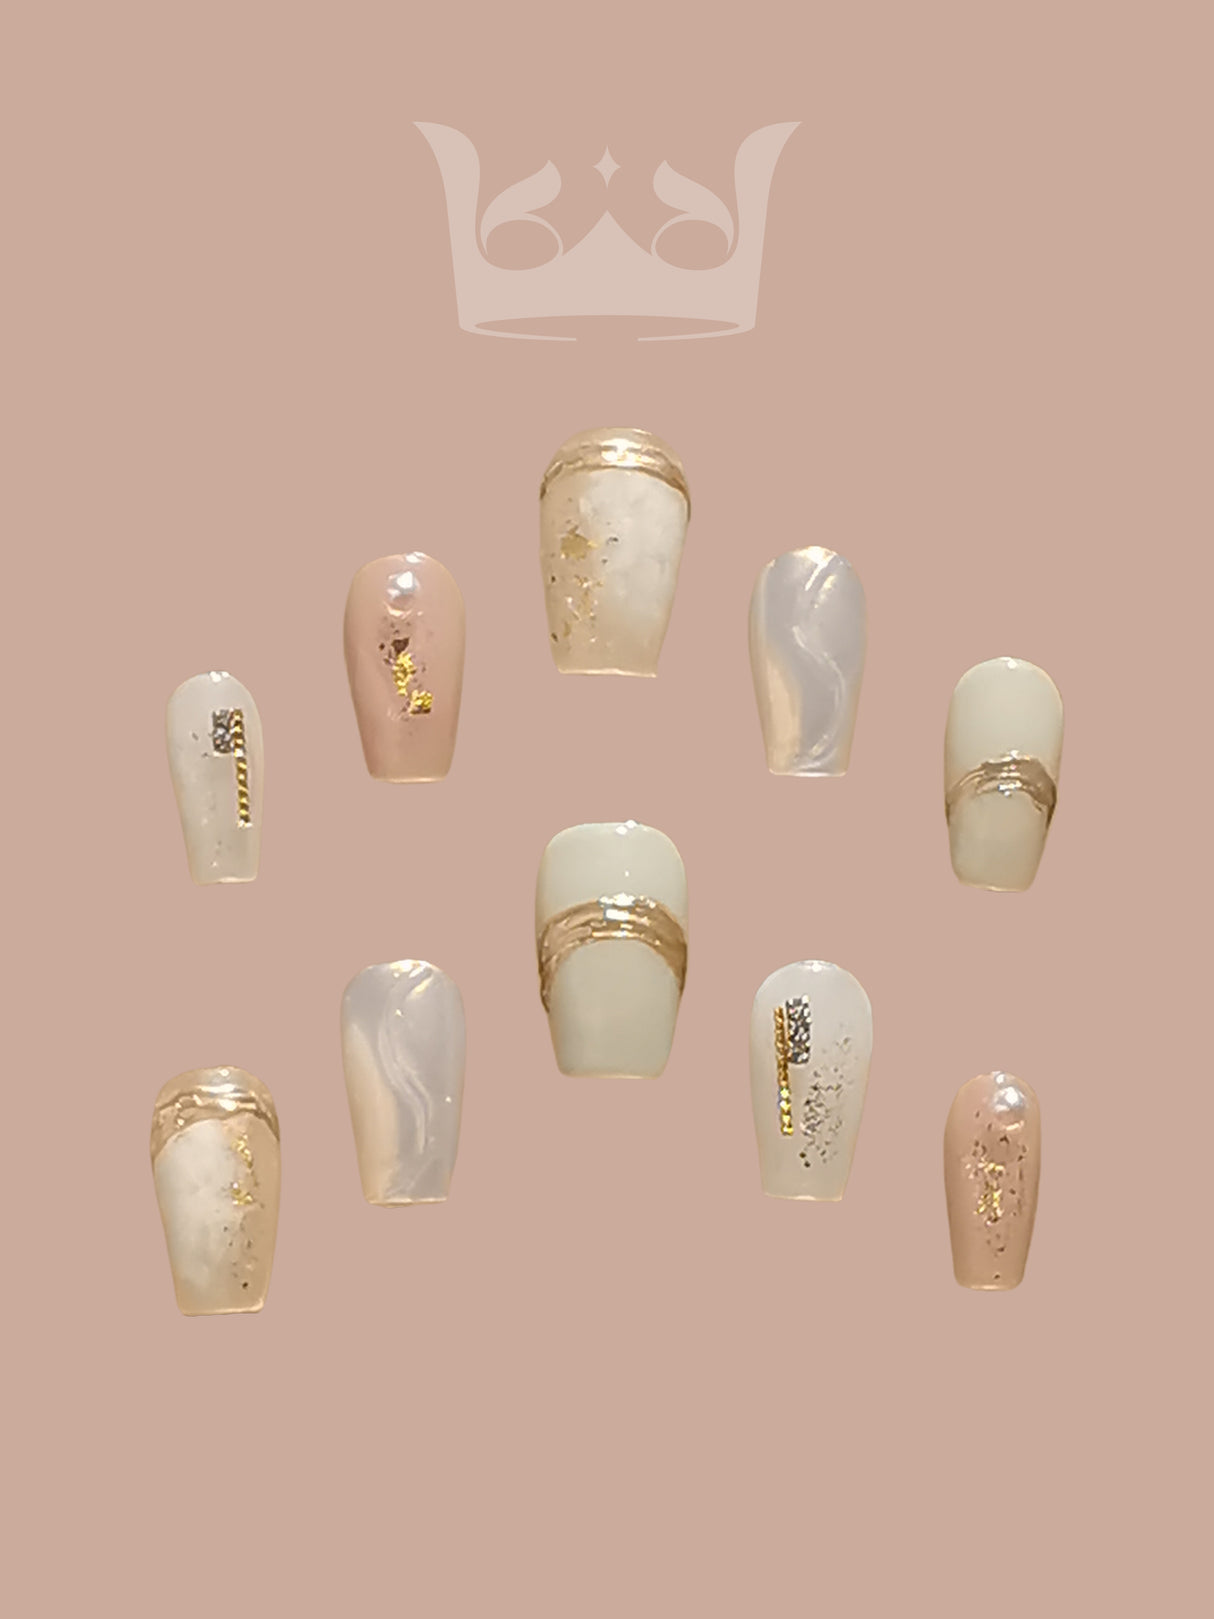 These press-on nails have a soft, neutral color palette, gold foil embellishments, and various patterns. They have a focus on subtle colors and luxurious metallic accents.